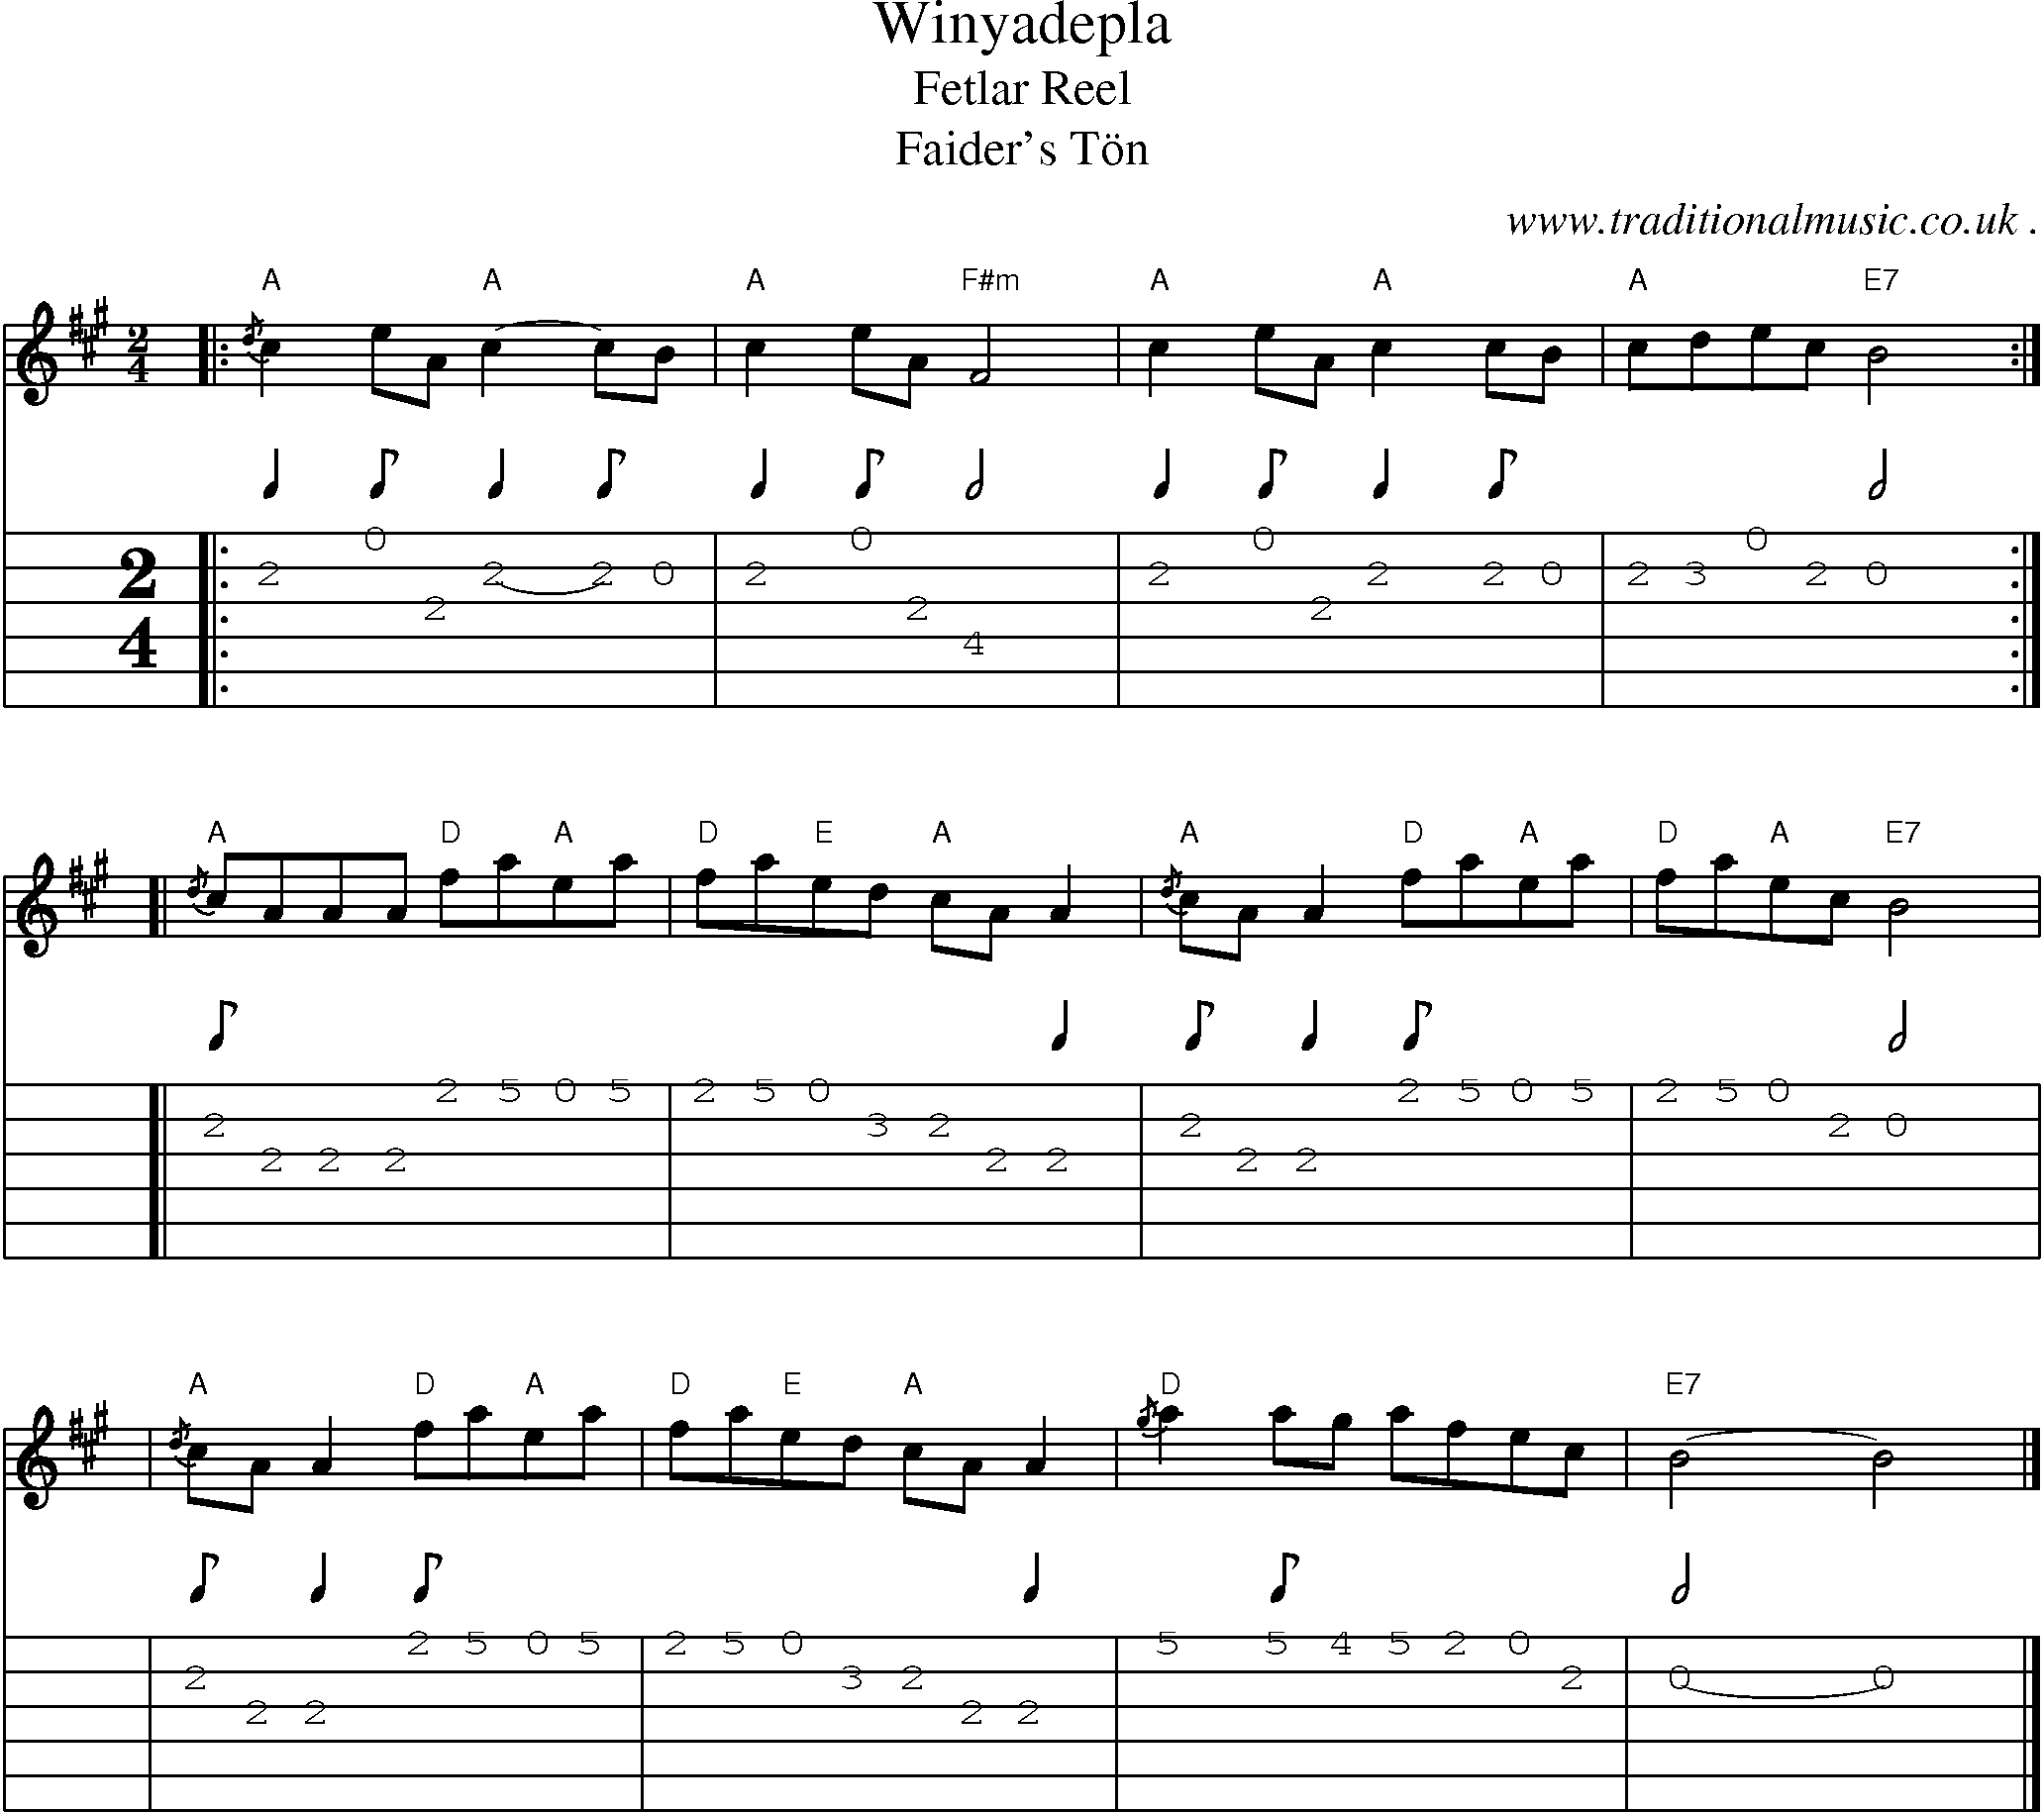 Sheet-music  score, Chords and Guitar Tabs for Winyadepla